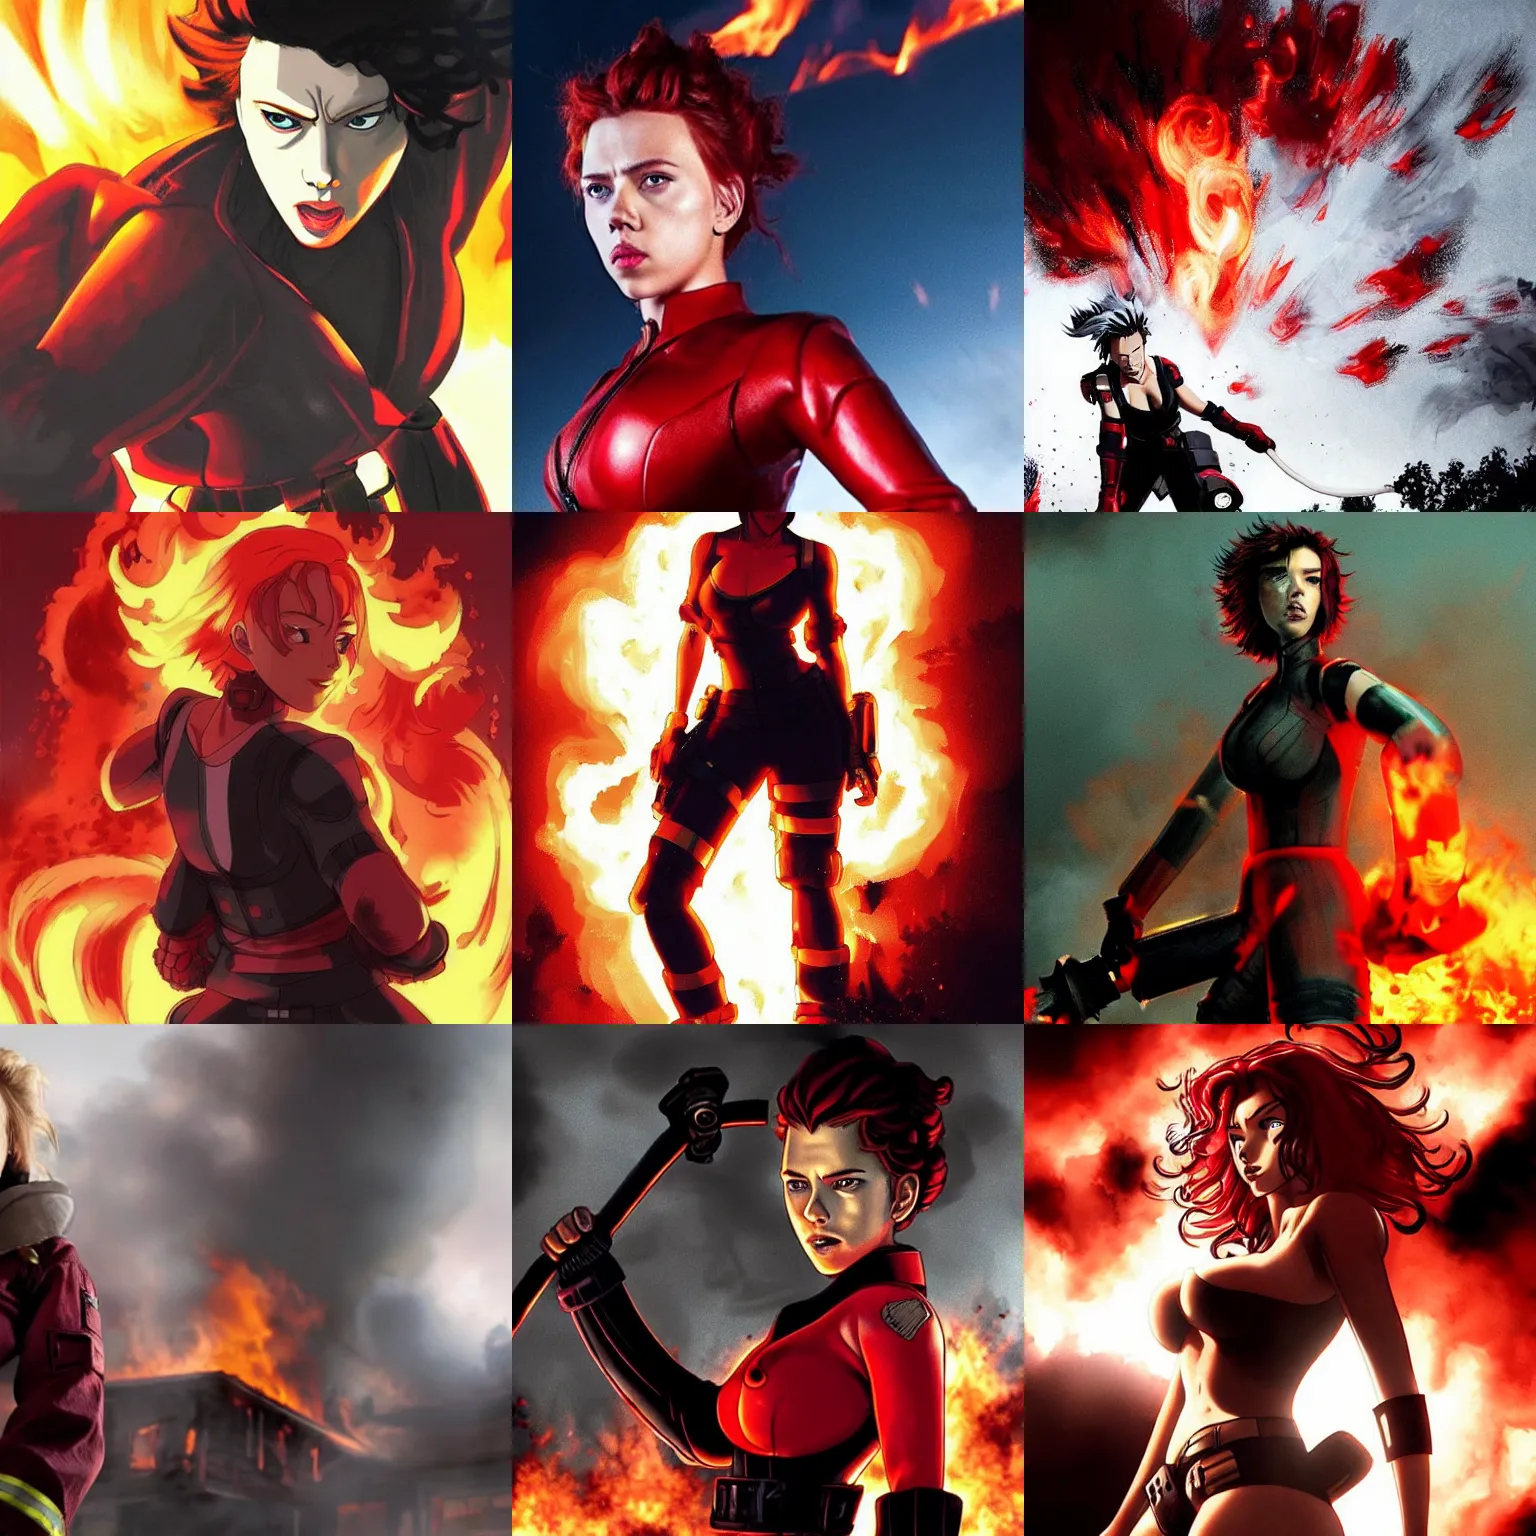 Prompt: angry scarlett johansson wearing fireman gear. surrounded by a burning houses, afro samurai anime style, dramatic lighting,